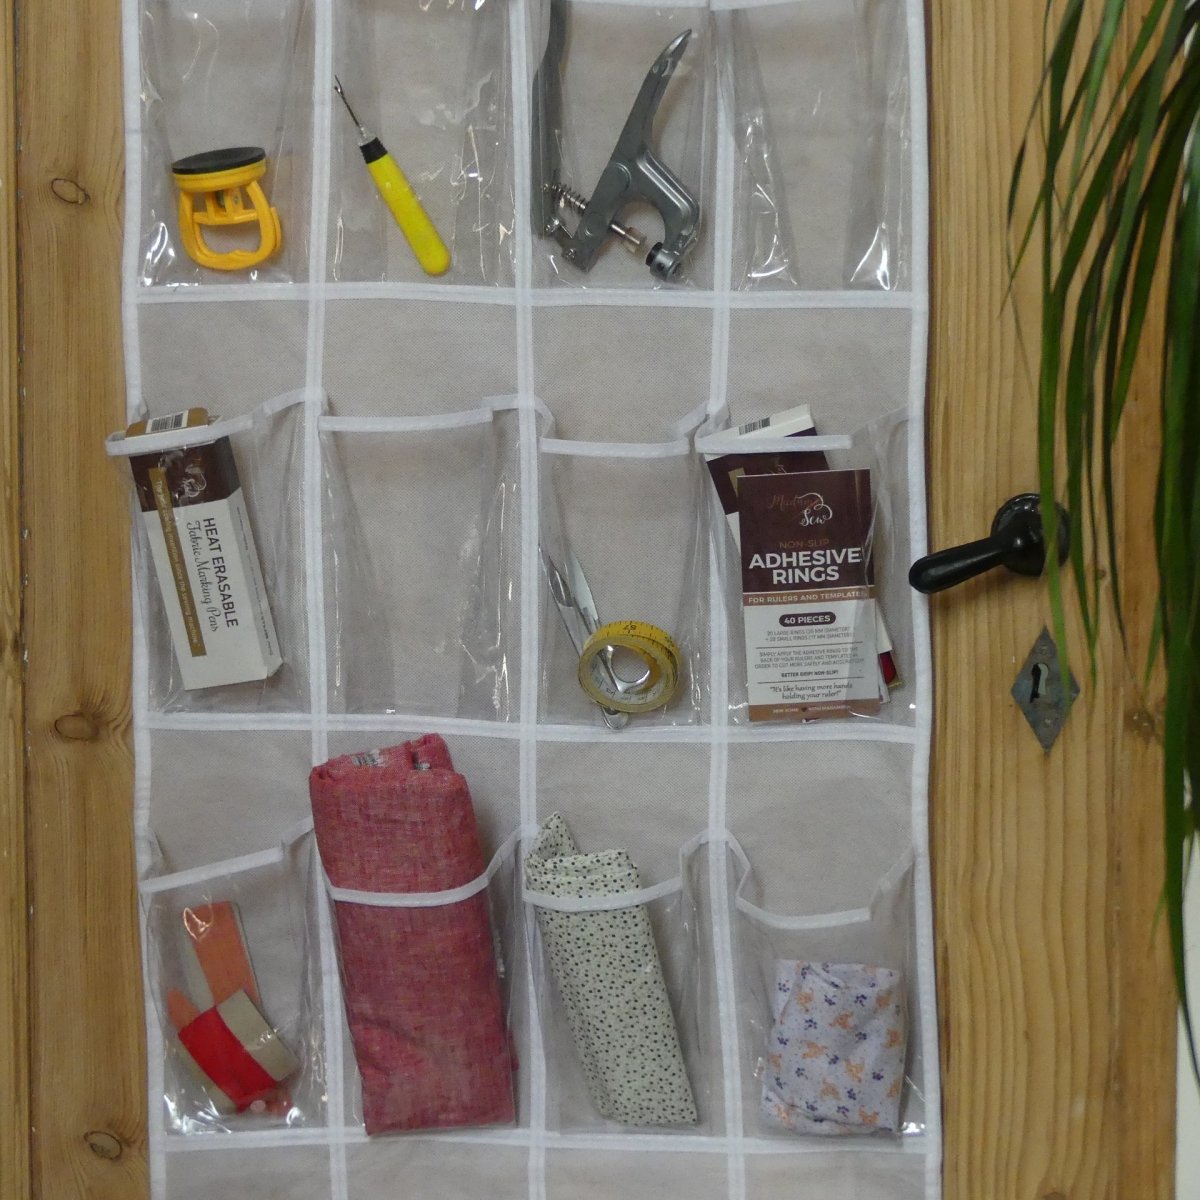 An Over The Door Organizer with sewing tools